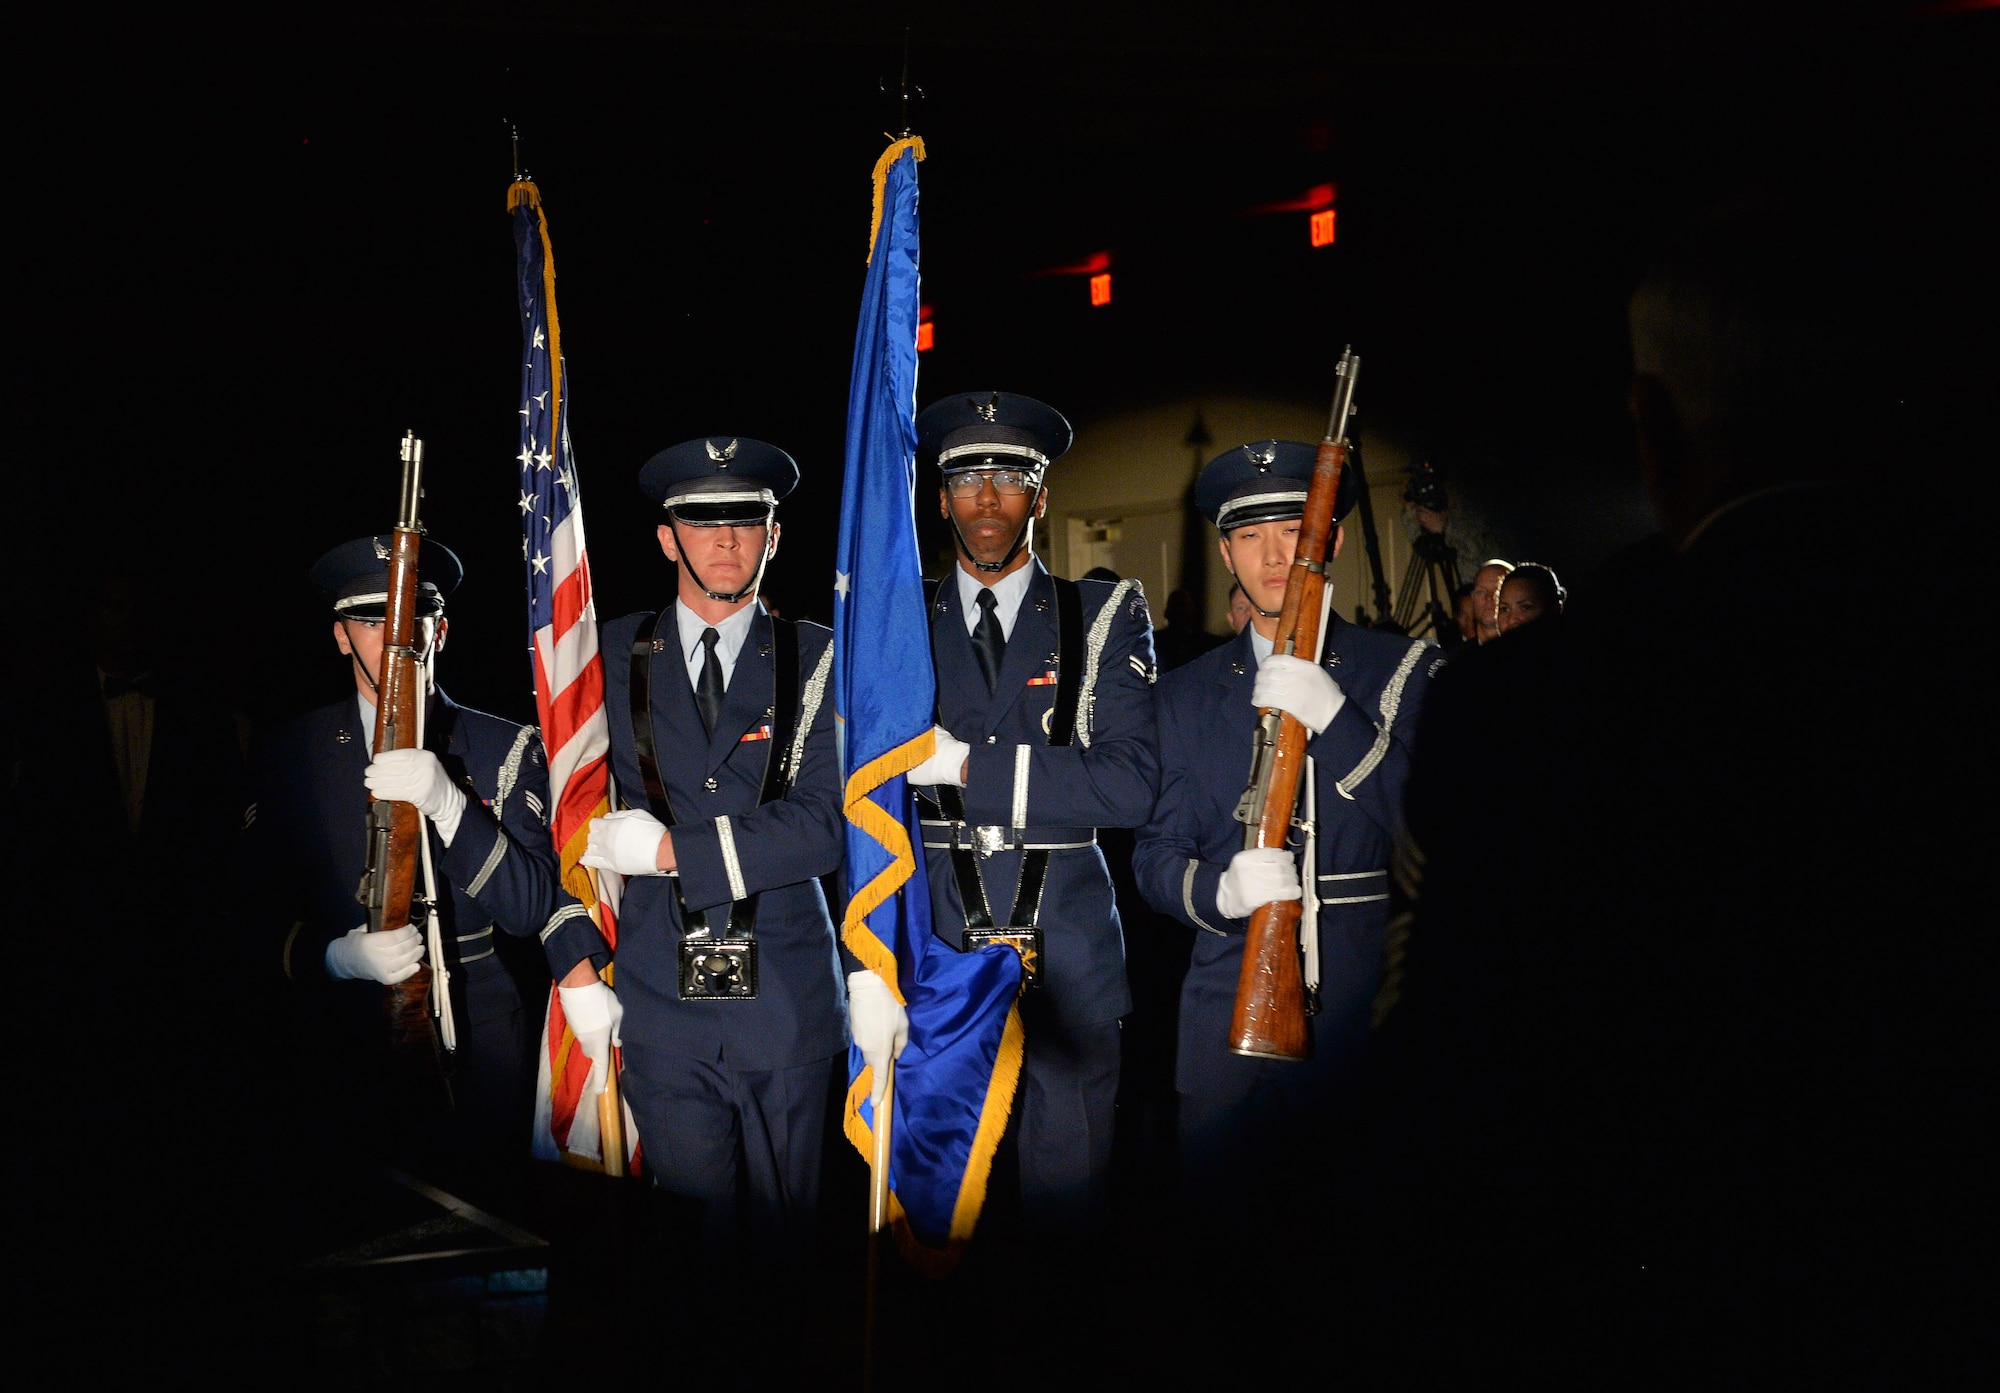 The Hurlburt Field Honor Guard presents the colors during an Order of the Sword ceremony at Hurlburt Field, Fla., Nov. 18, 2016. The ceremony honored Lt. Gen. Brad Heithold, former commander of Air Force Special Operations Command, for his significant contributions to the enlisted force. (U.S. Air Force photo by Senior Airman Andrea Posey)